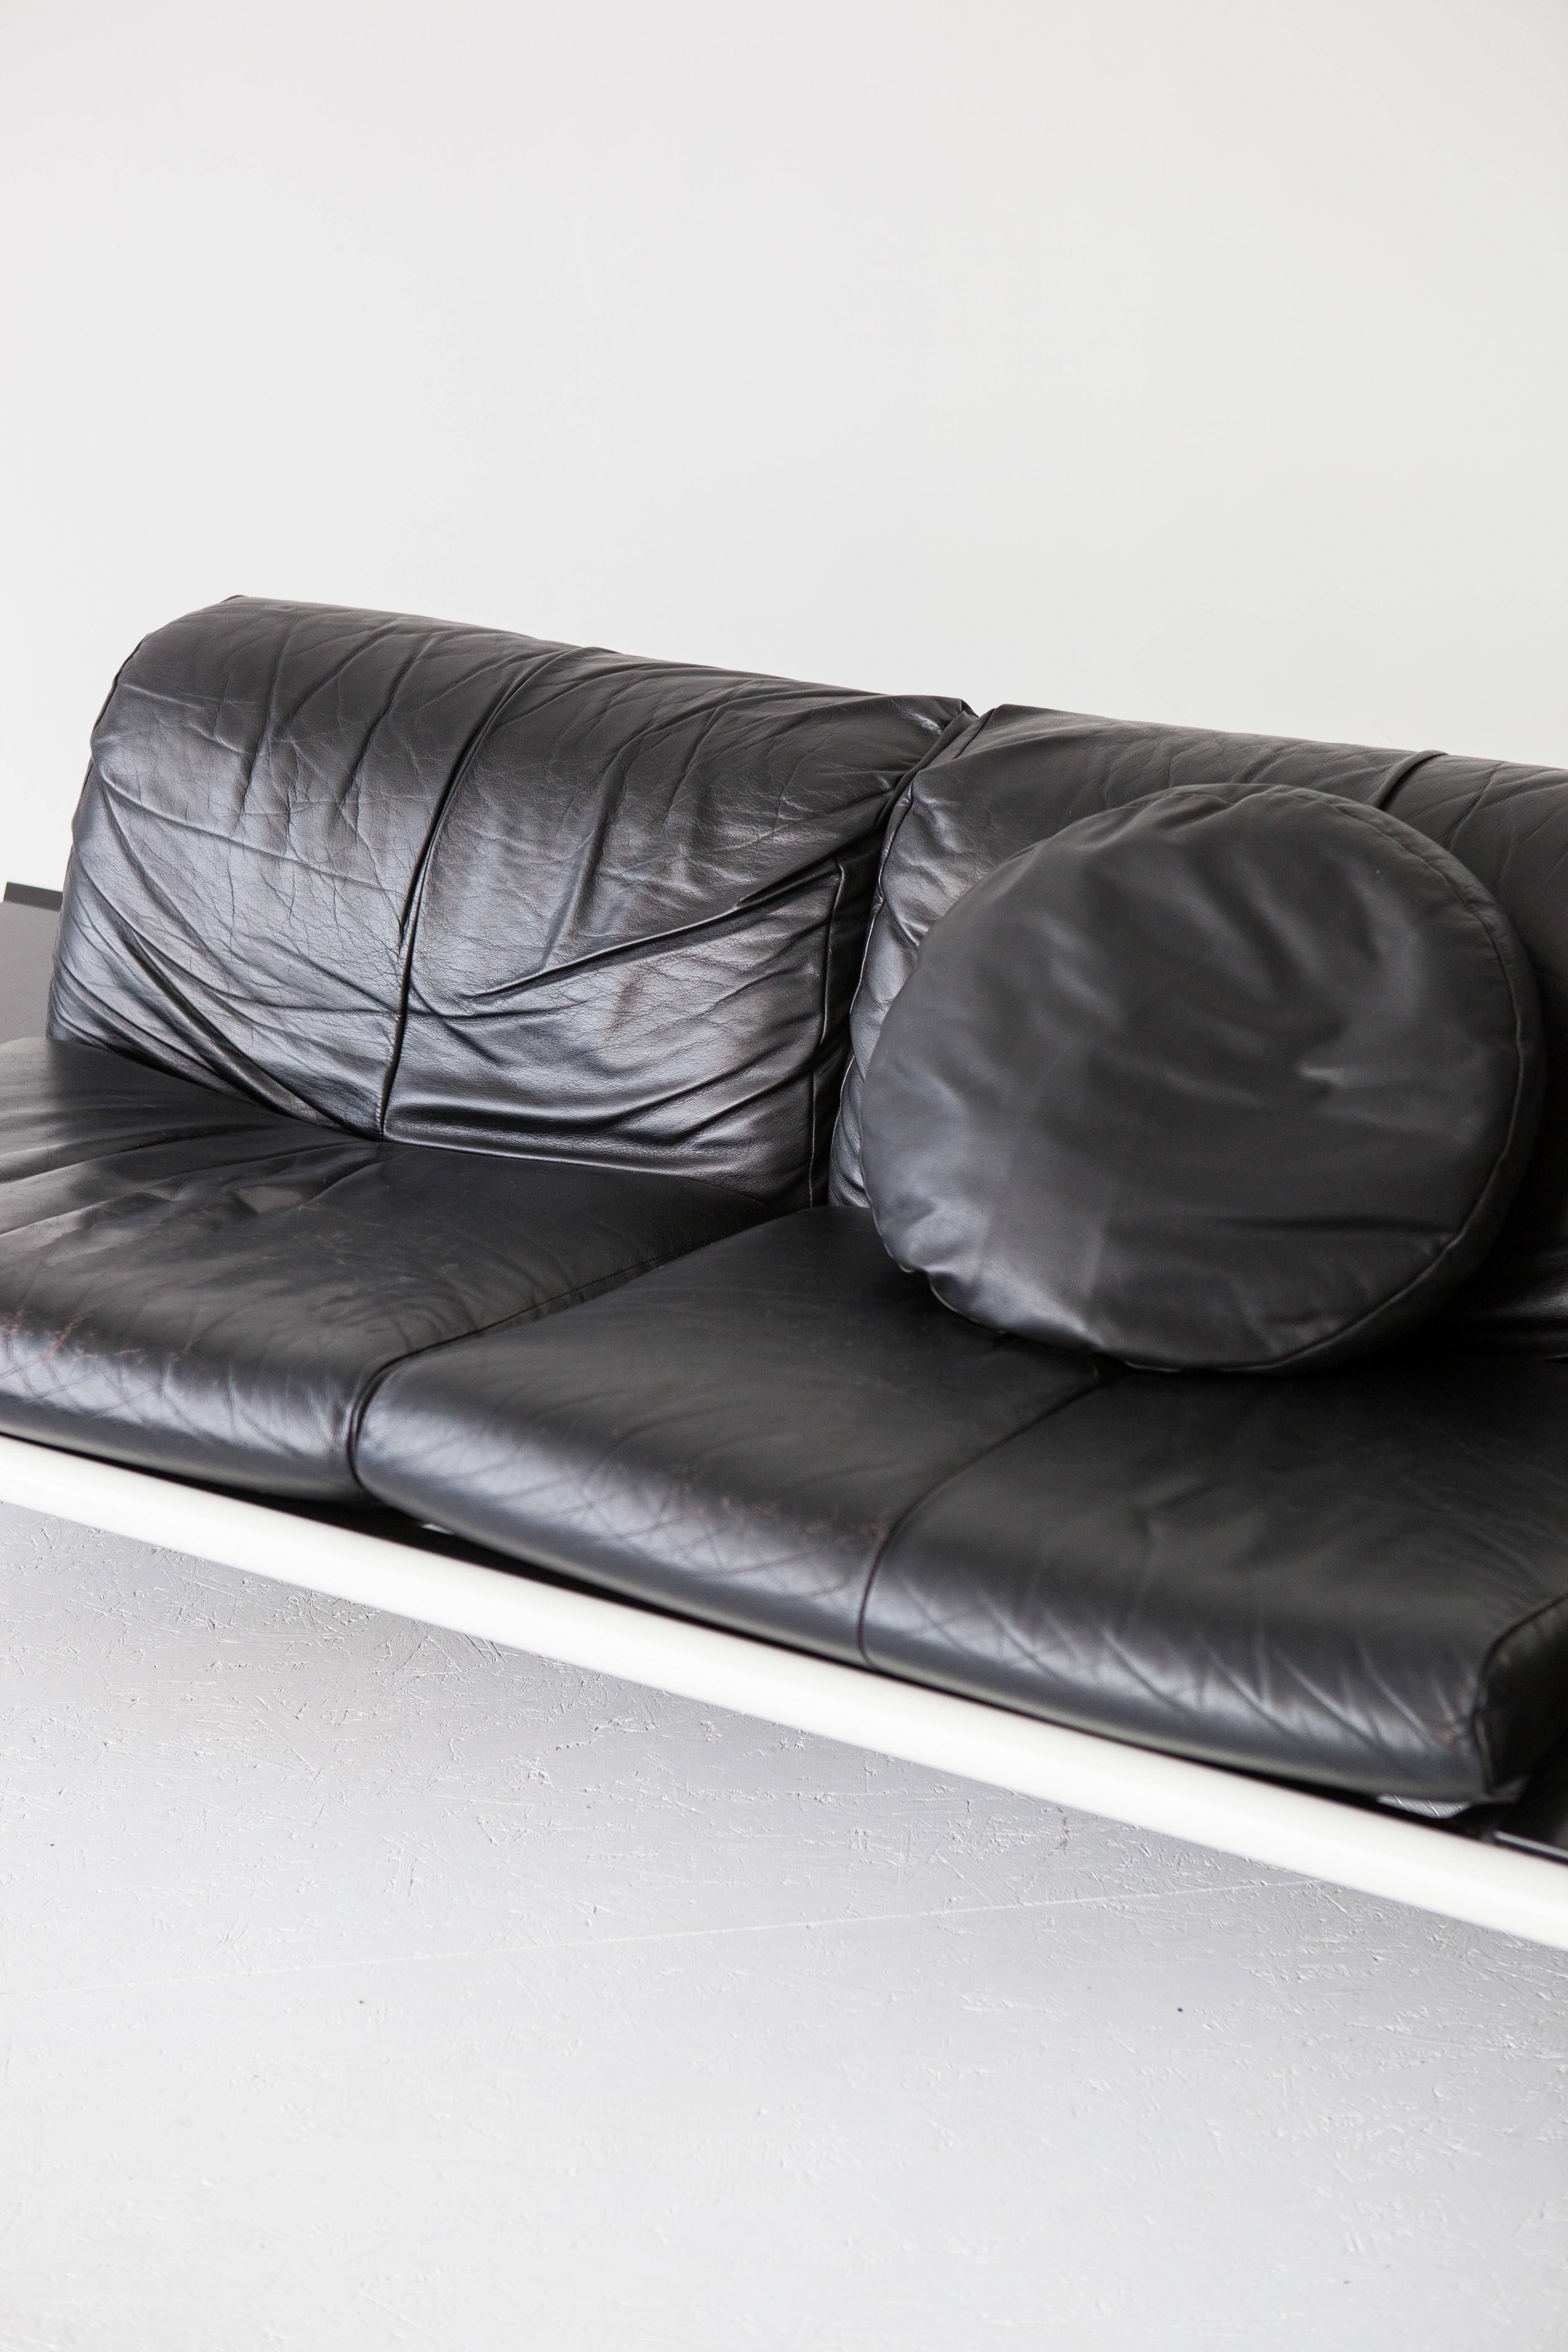 Harvink 'Mission' 2-seater sofa In Good Condition In Den Haag, ZH